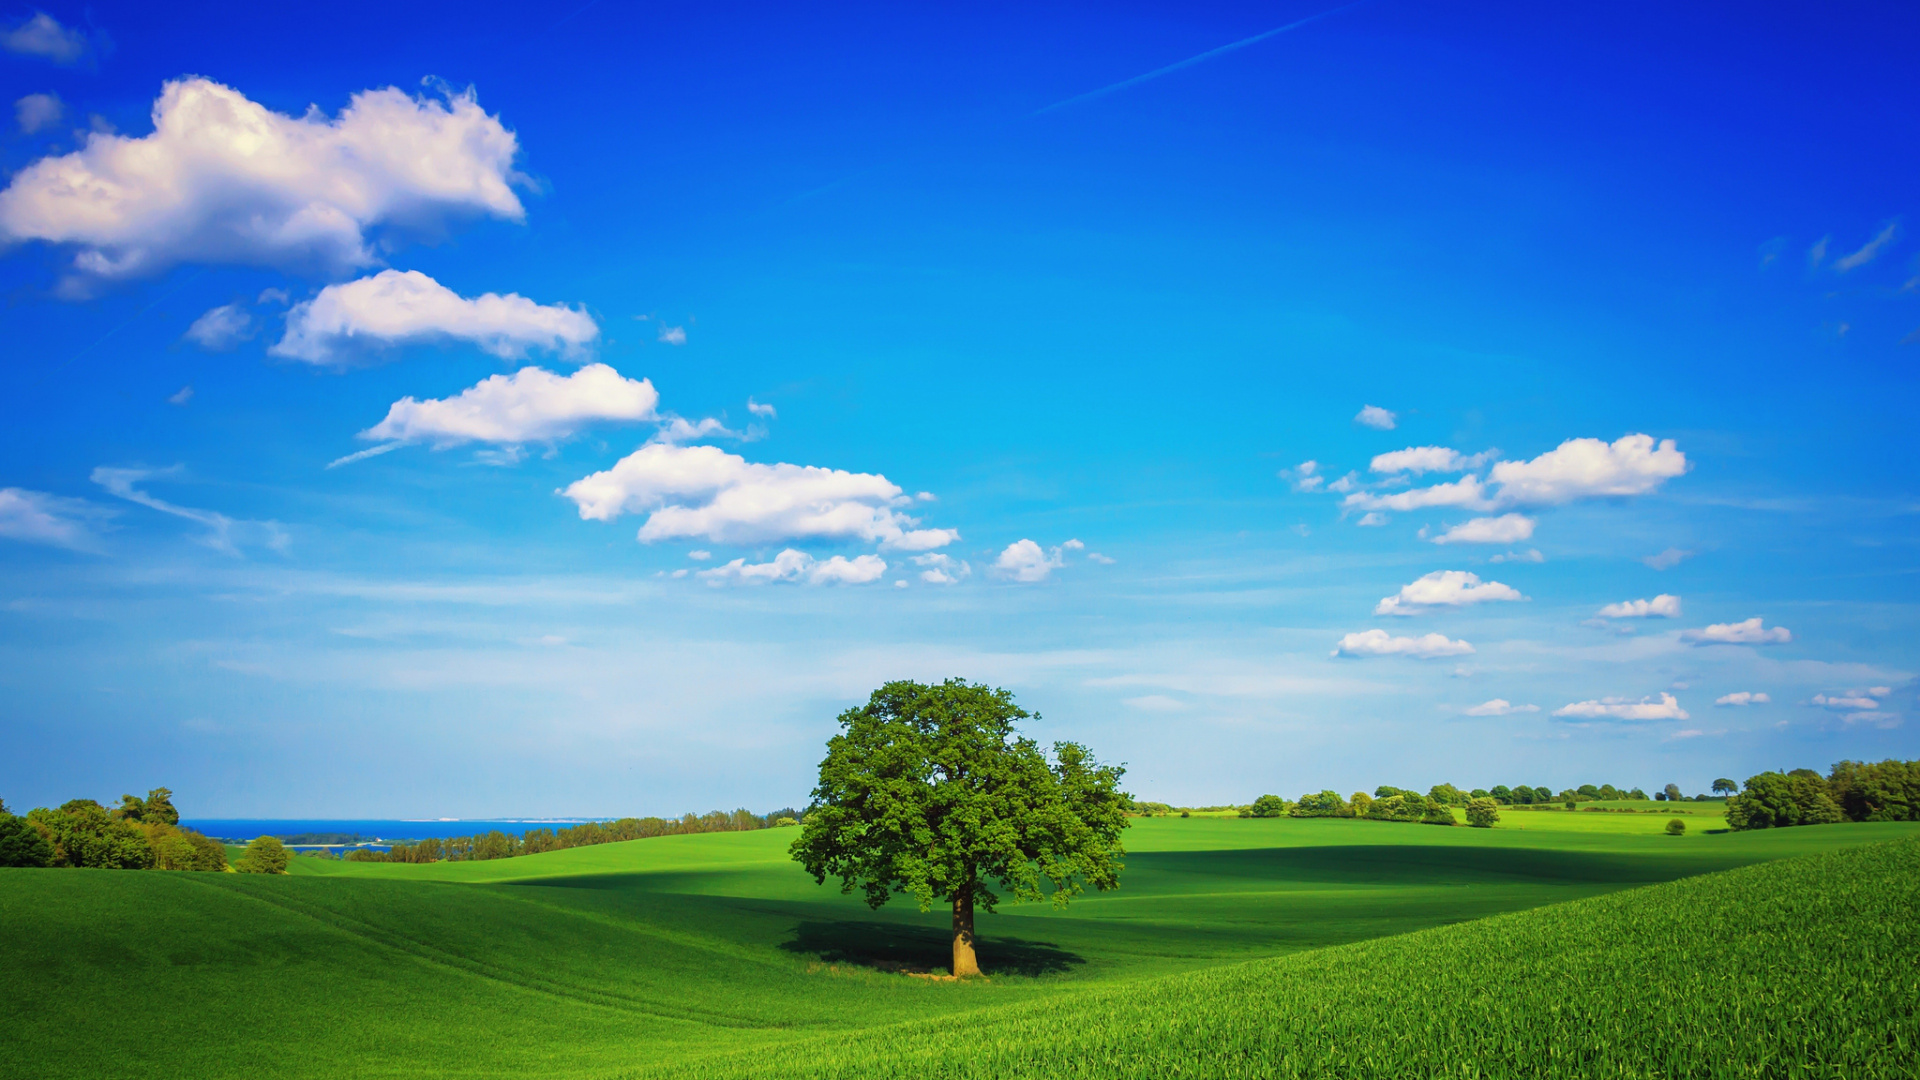 Green Tree on Green Grass Field Under Blue Sky During Daytime. Wallpaper in 1920x1080 Resolution